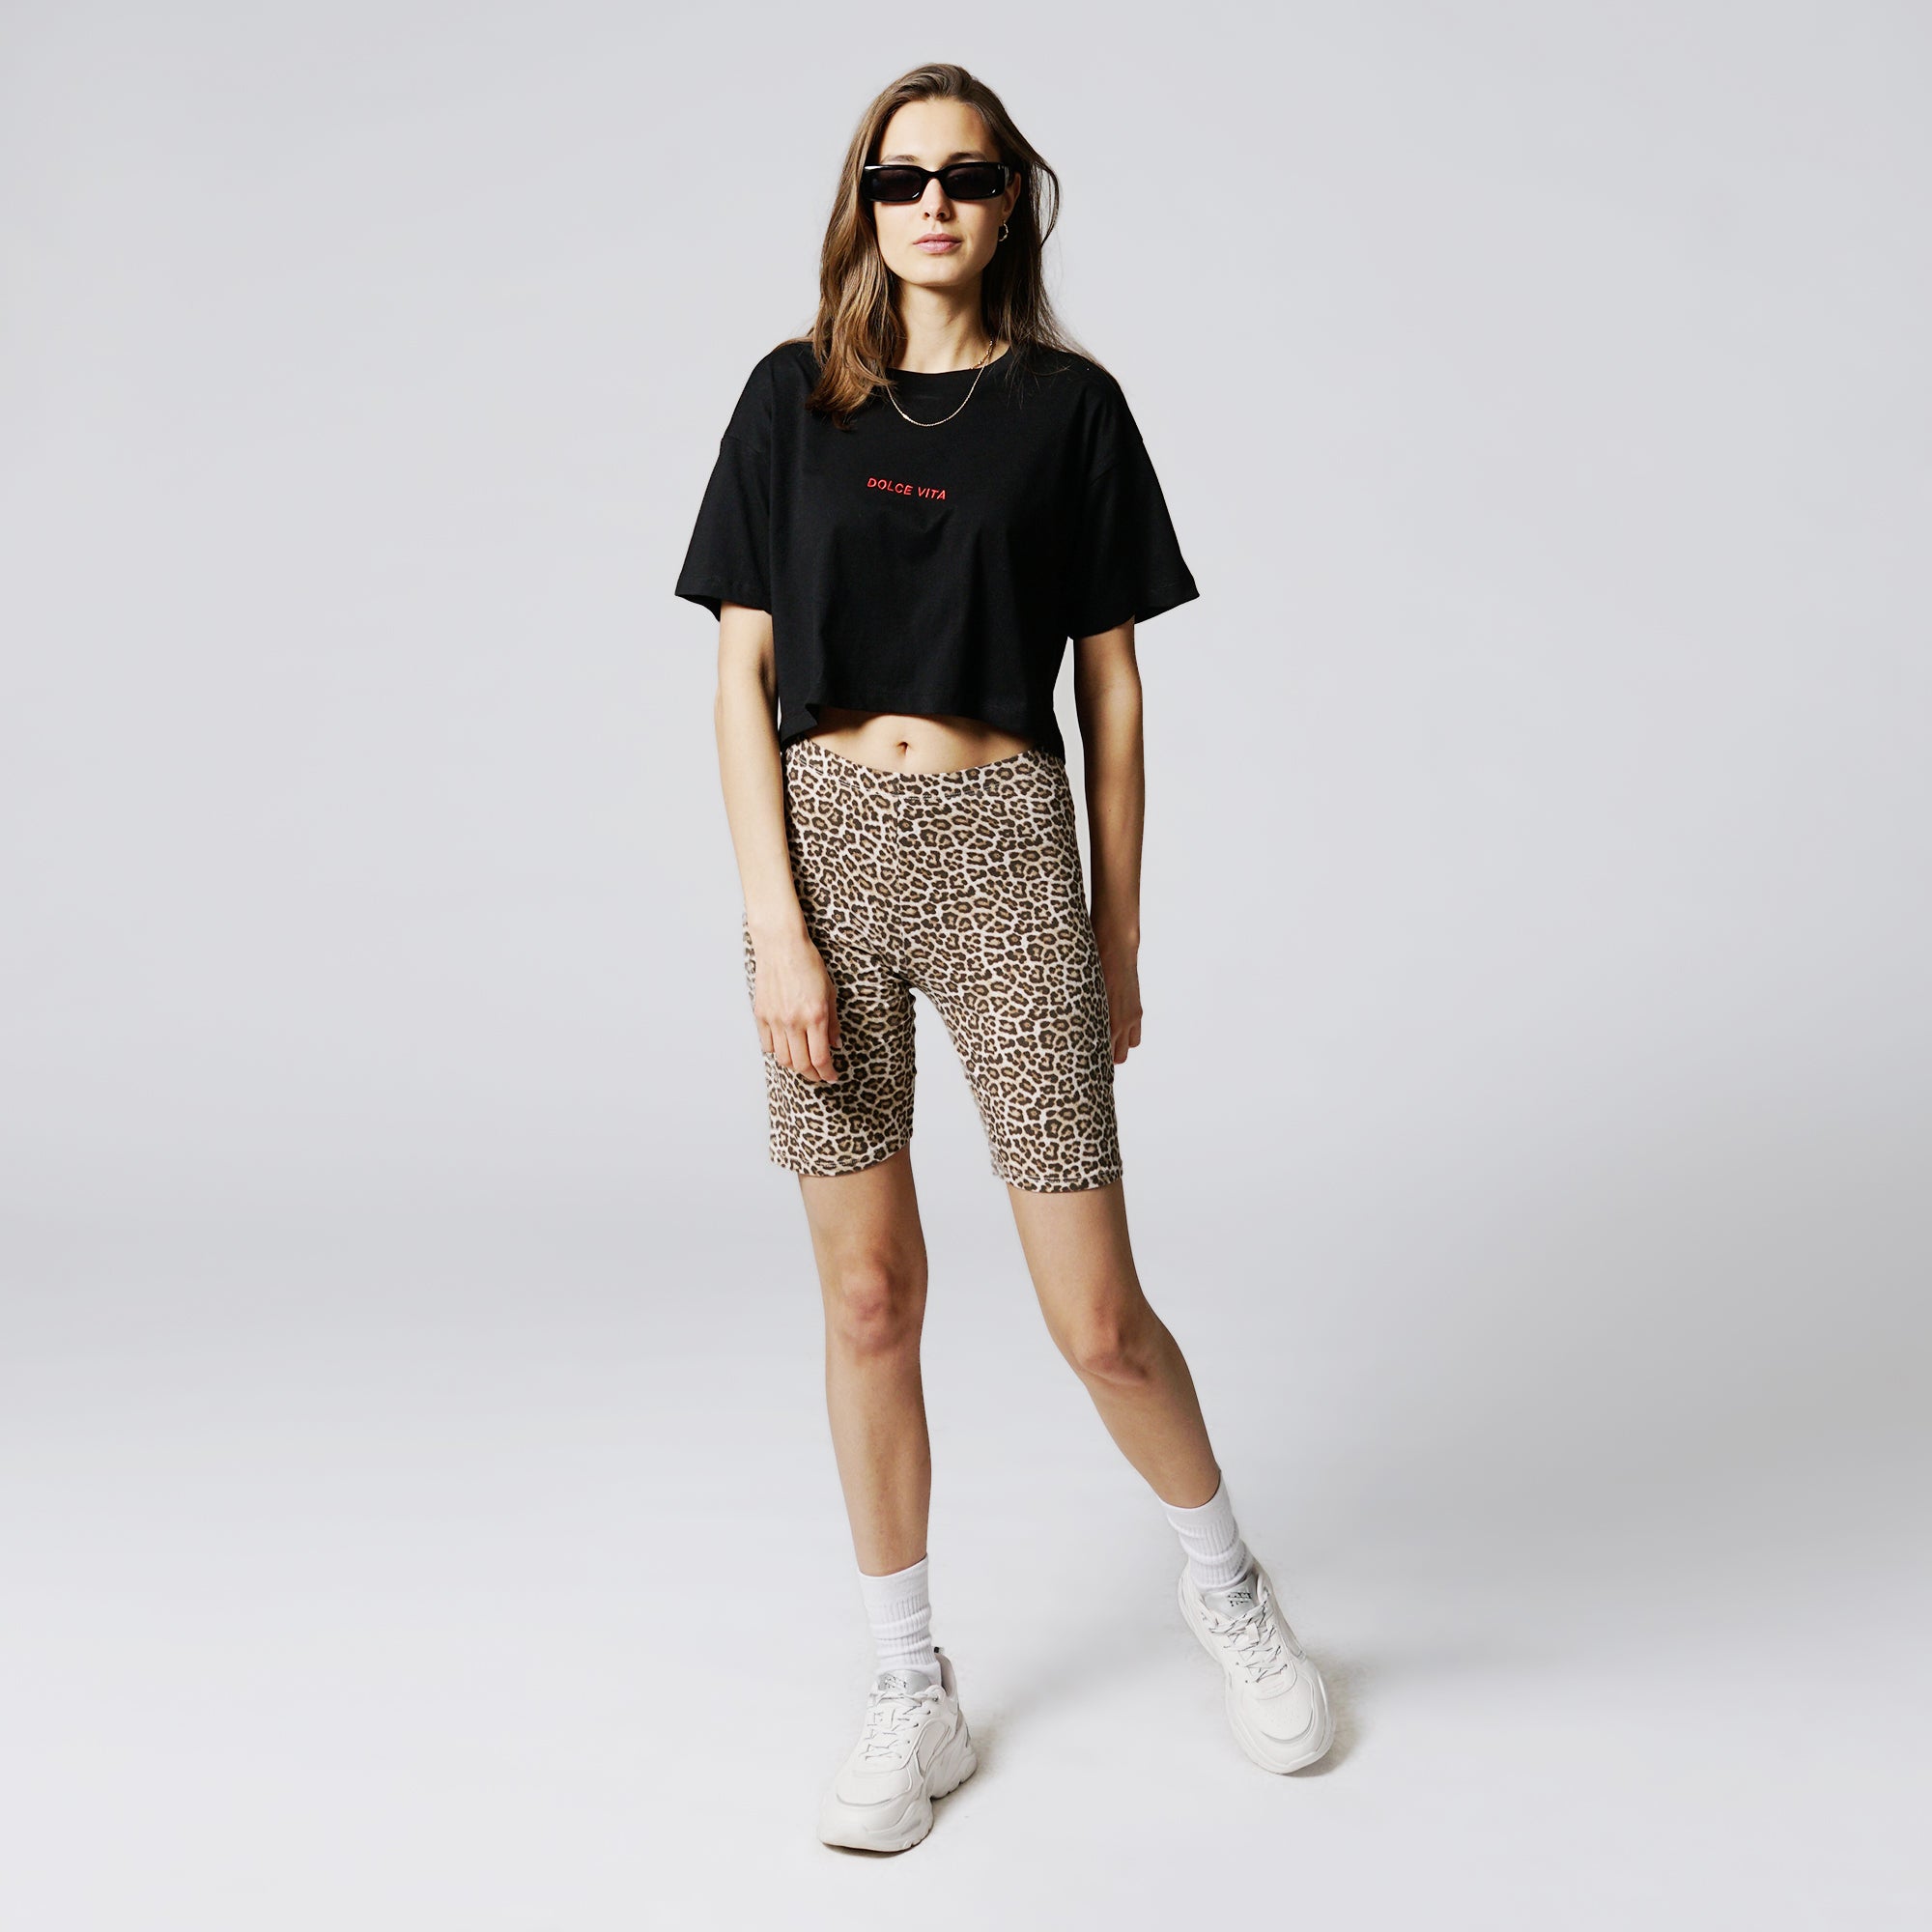 On Vacation Ladies Cropped T-Shirt "Dolce Vita" - Black